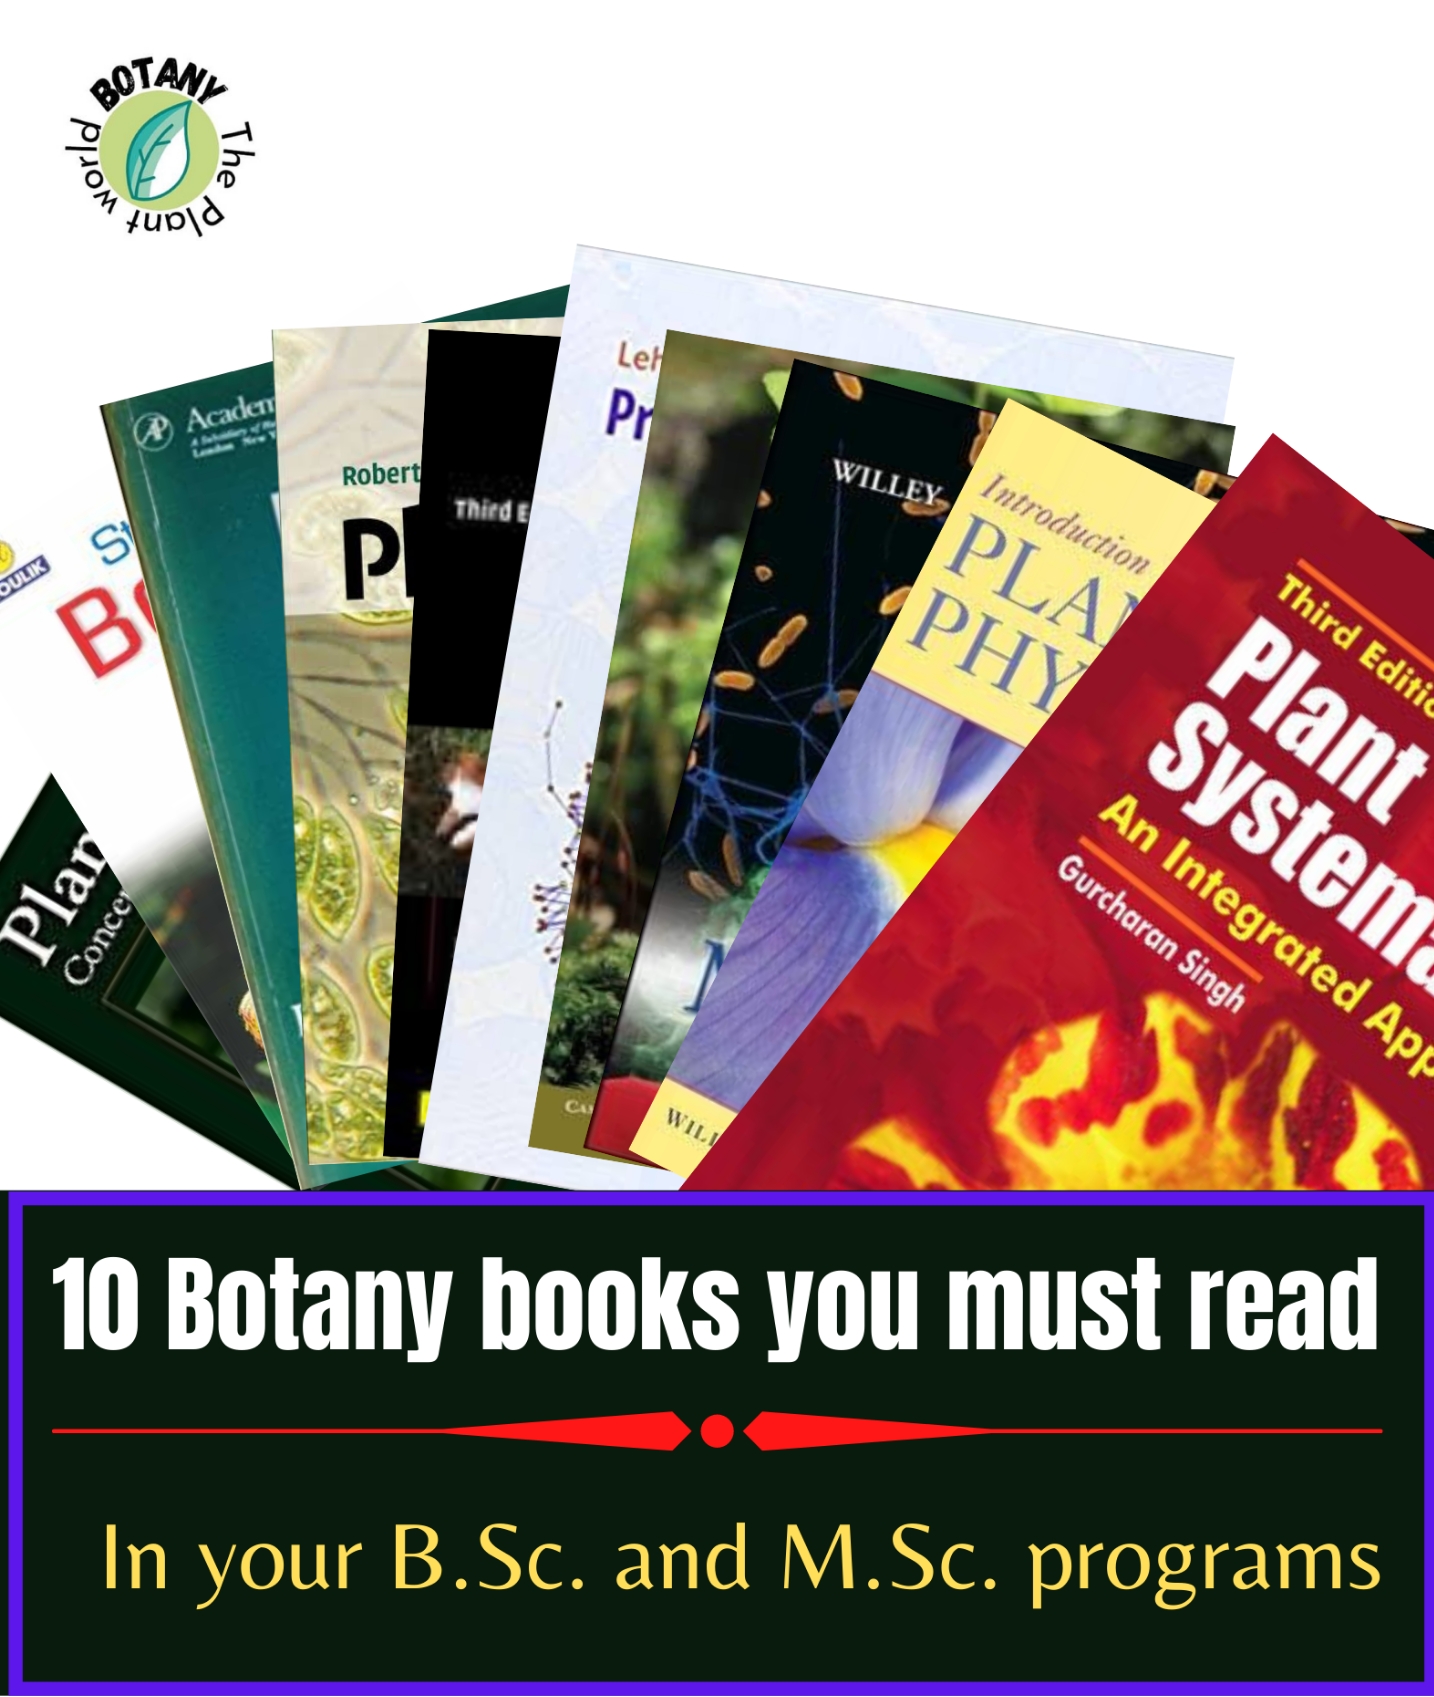 10 Botany Books You Must Read in Your BSc and MSc Programs - [Times of Botany]